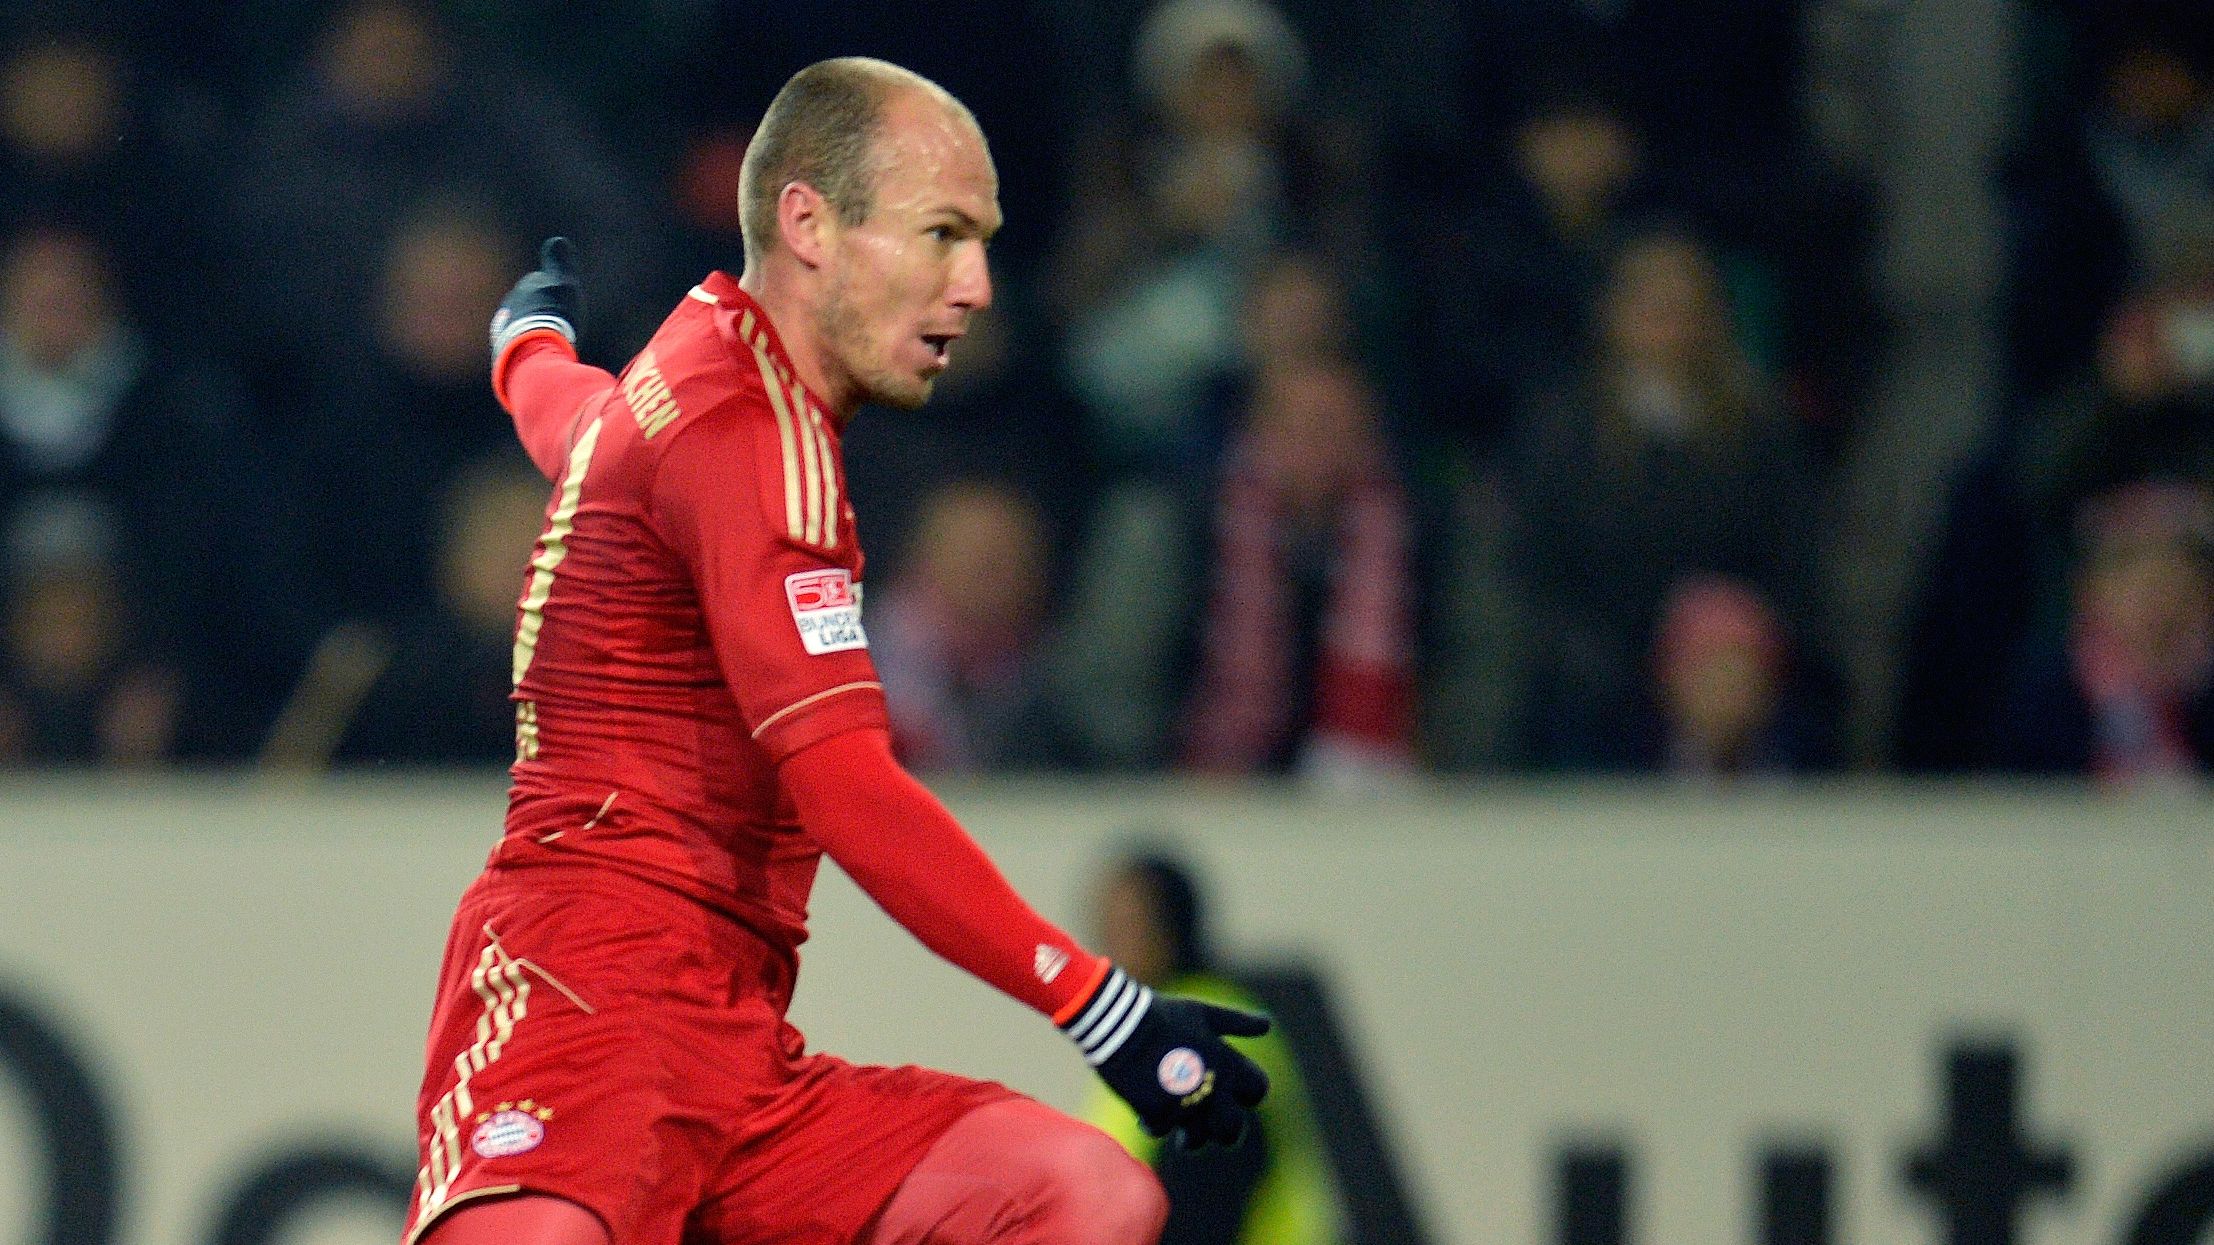 Arjen Robben fires home Bayern's second goal of the game to seal all three points at Wolfsburg.